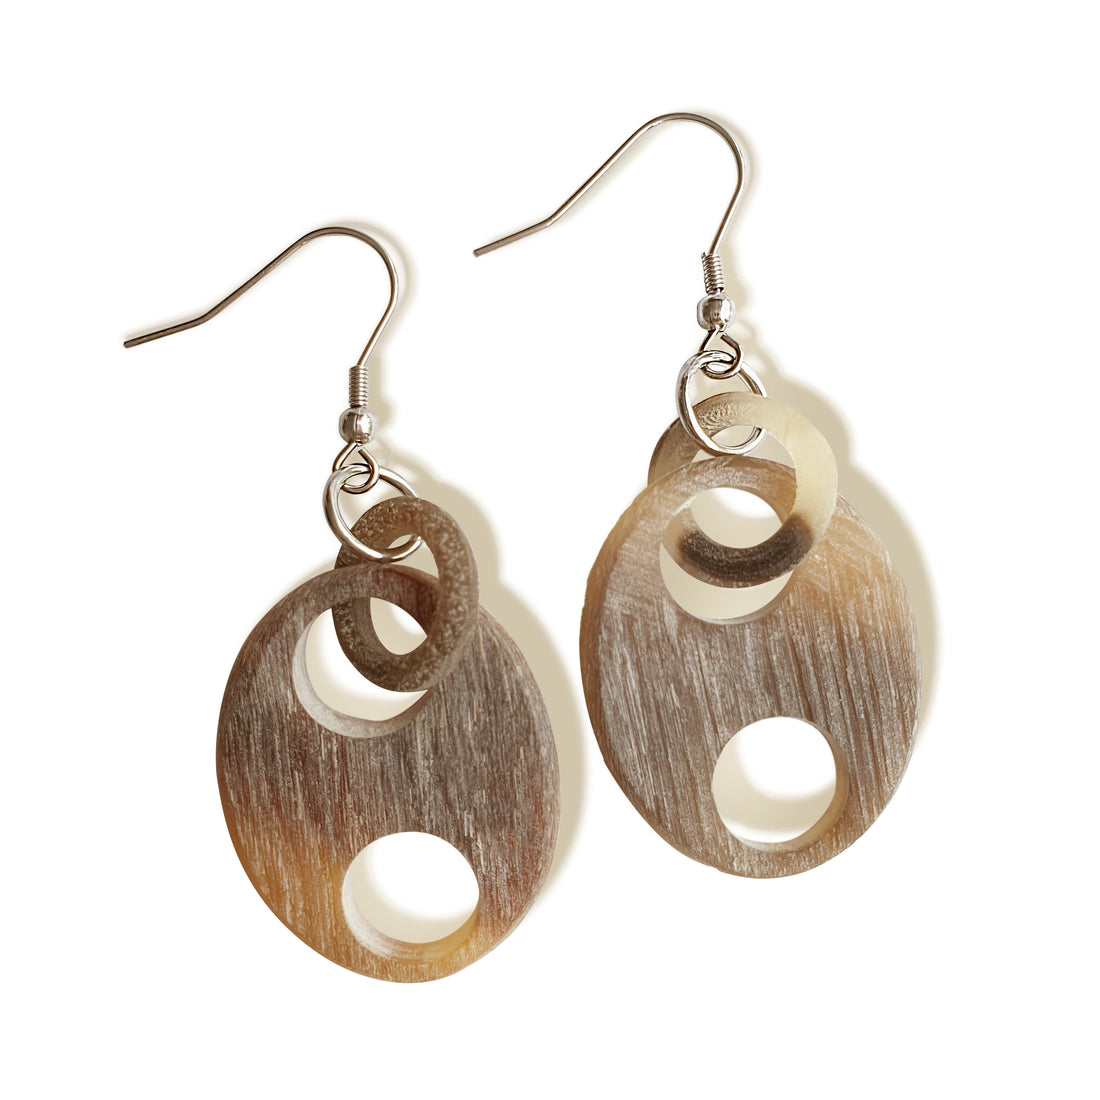 Evil Eye Dangle Earrings are handmade with light grey color under the efforts of craftsman in the natural light